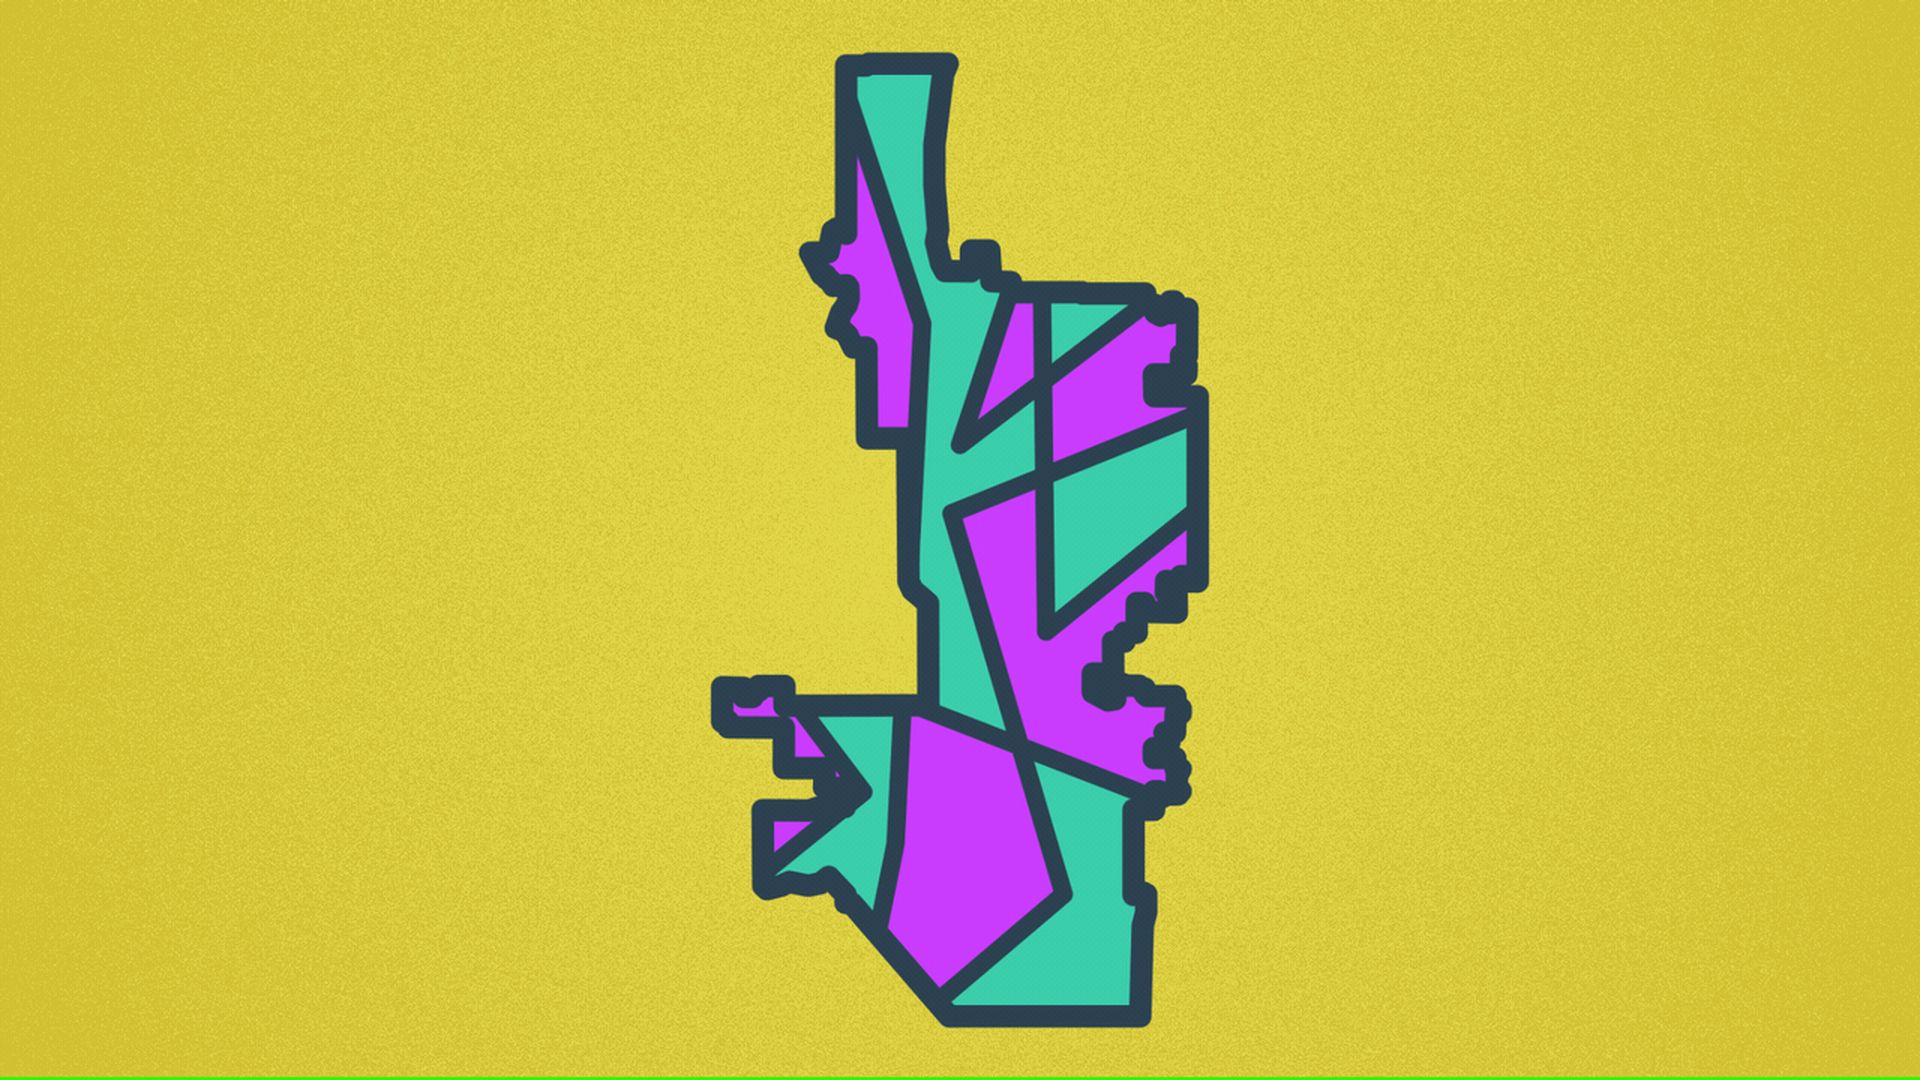 An outline of Phoenix with green and purple districts drawn on it. 